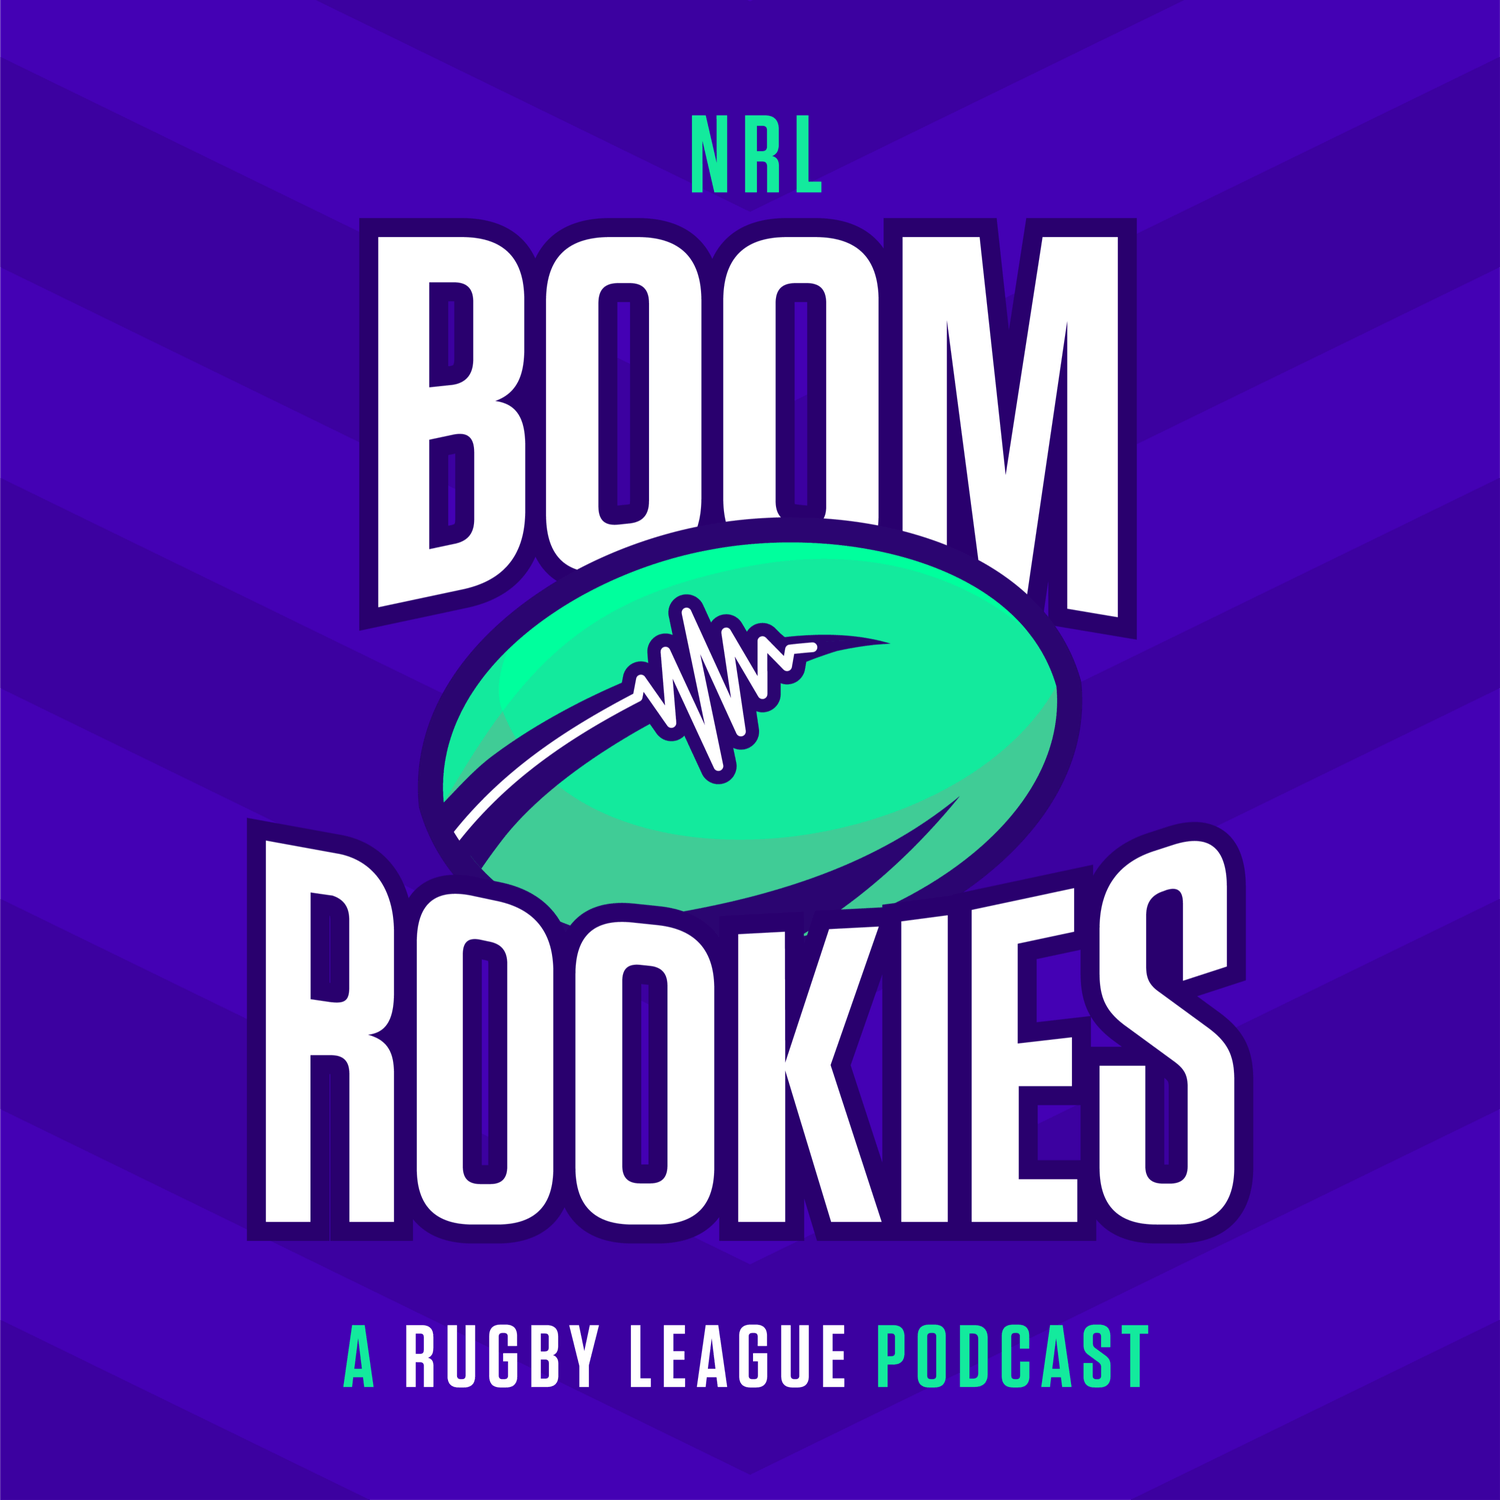 News & Question Time - Coupla Fn Cs Talking Footy On A Podcast